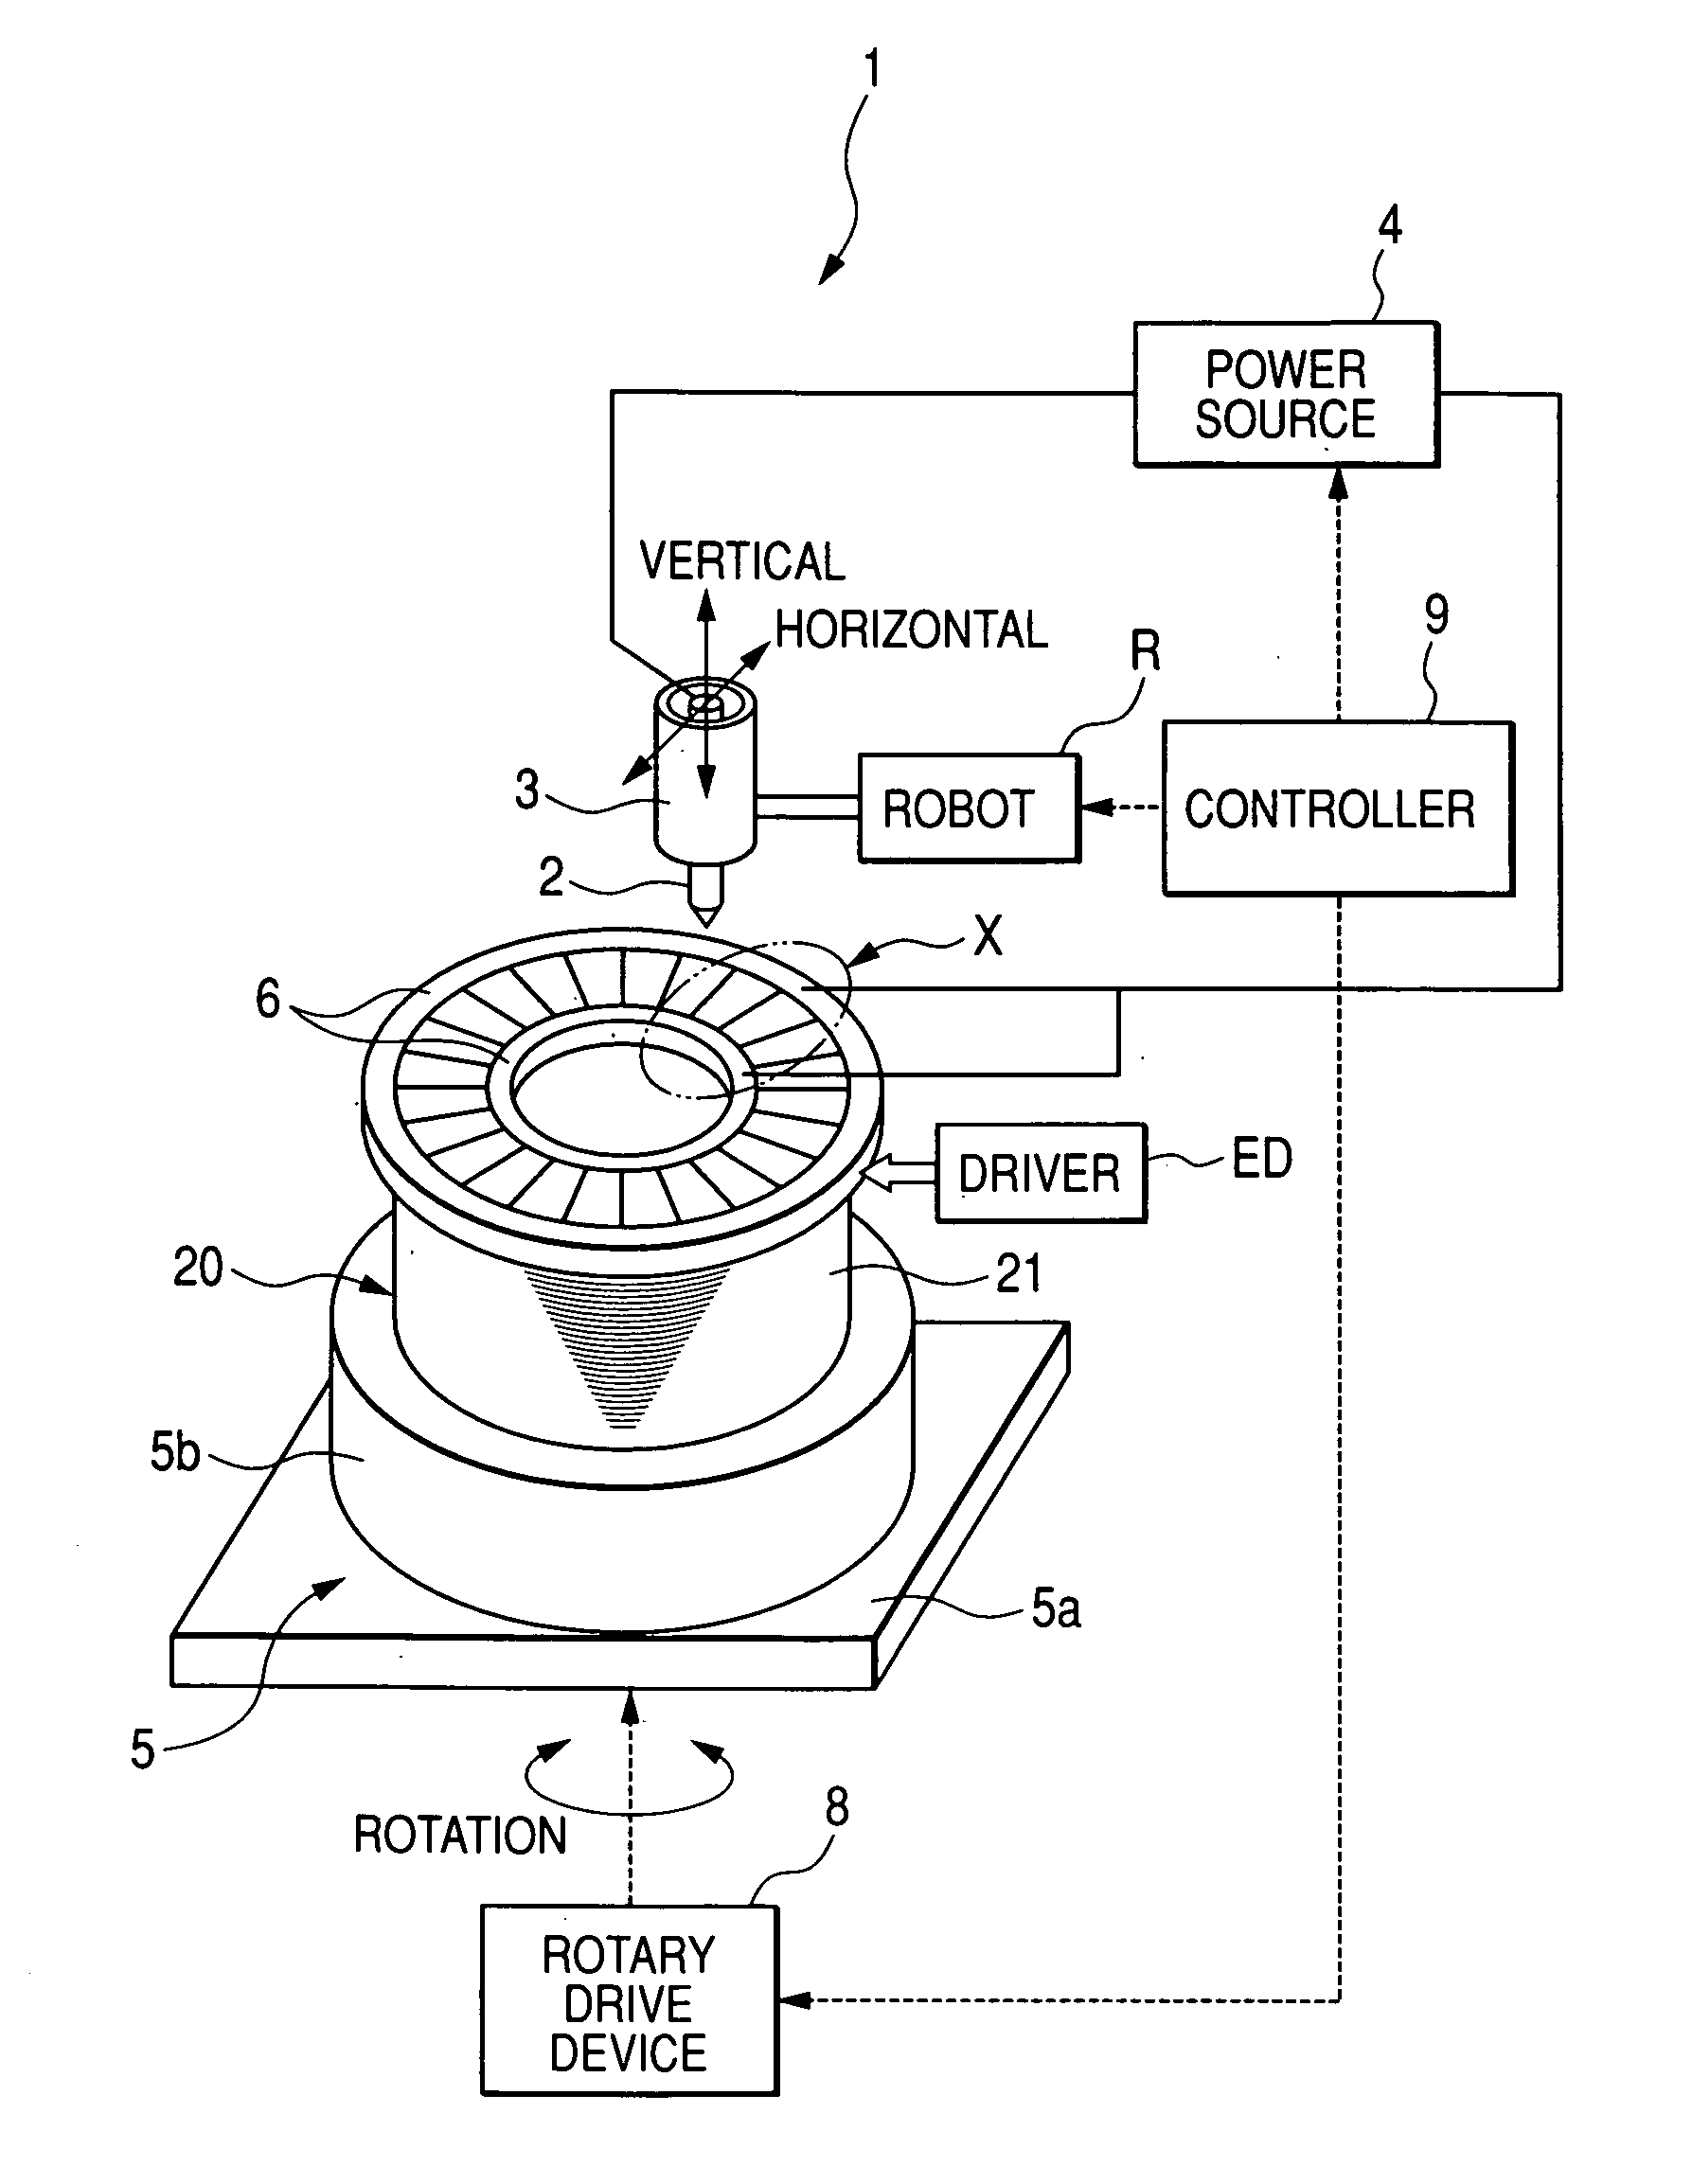 Method of joining a plurality of conductor segments to form stator winding